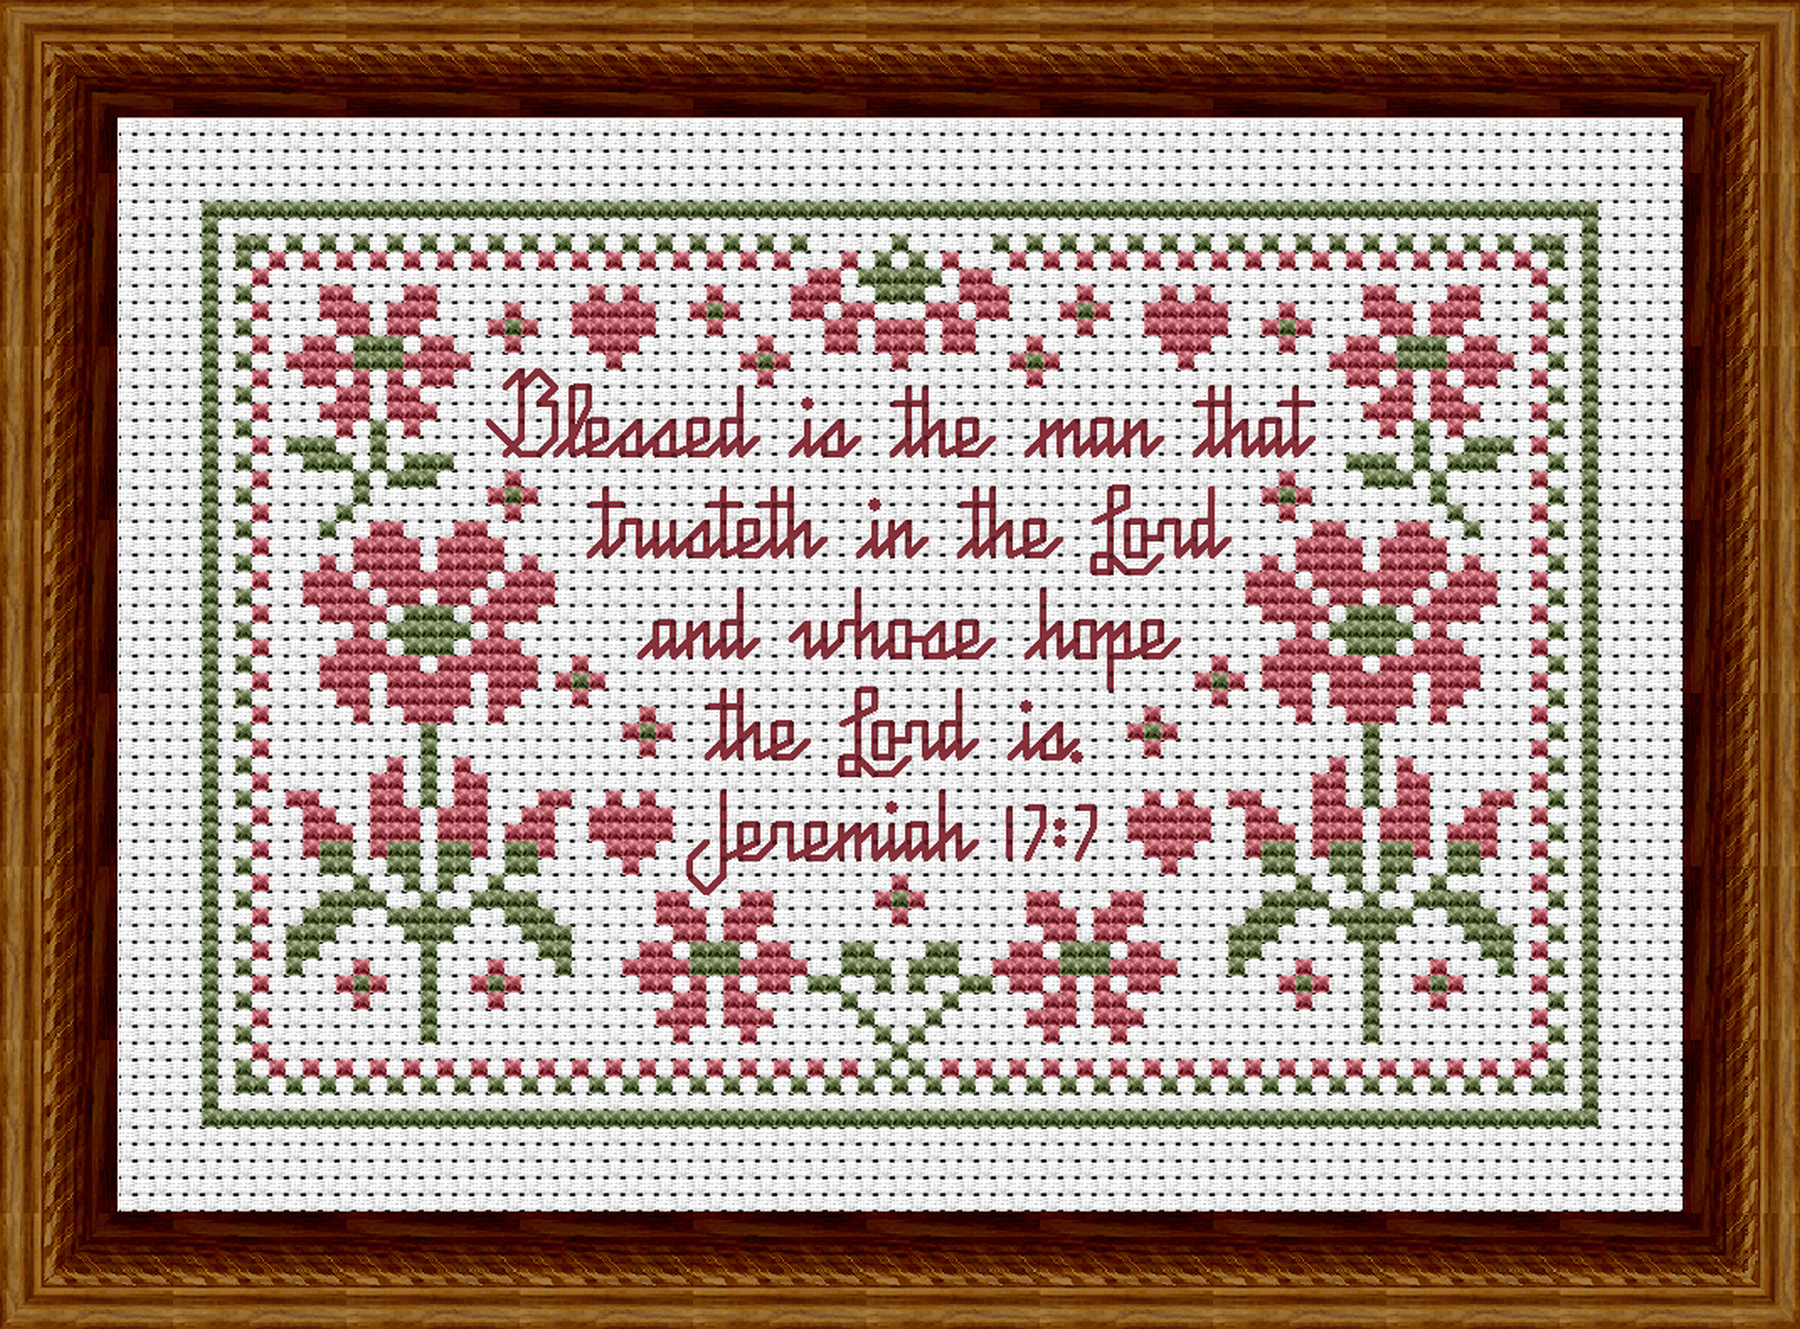 Whose Hope The Lord Is Jeremiah 17:7 Cross Stitch Pattern 3002